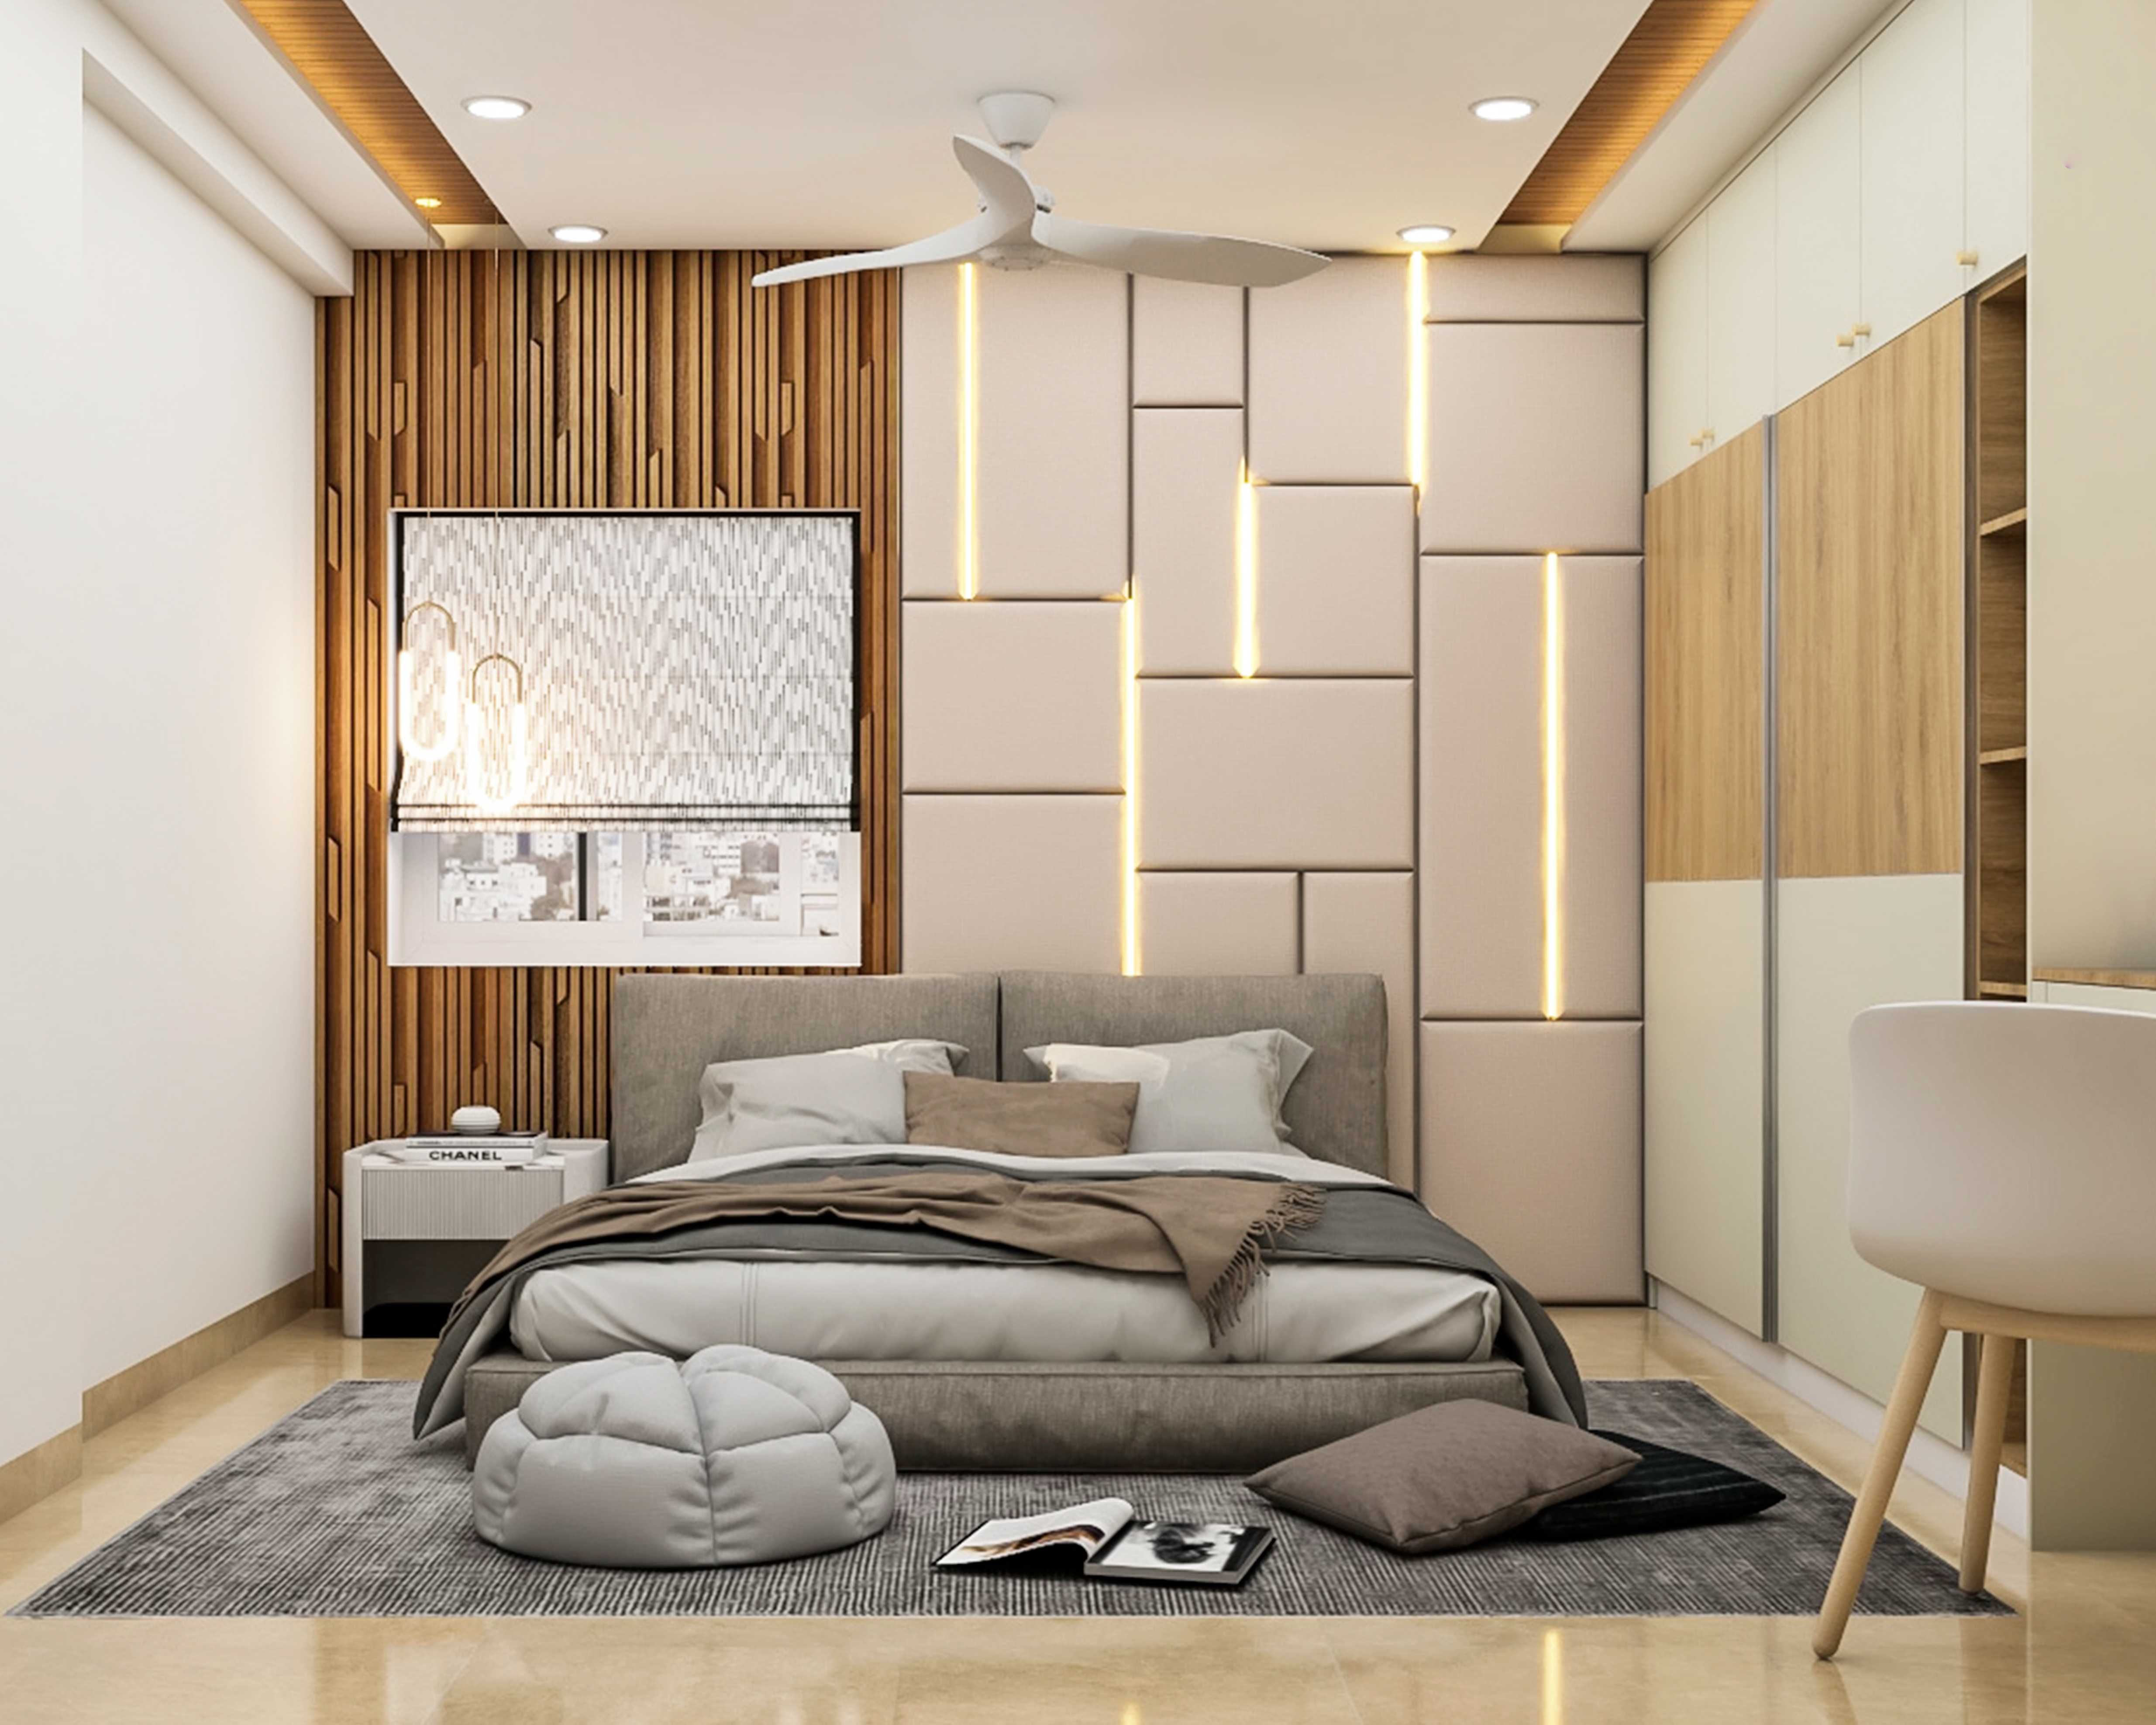 Top 50 modern and contemporary Bedroom Interior Design Ideas of 2018- Plan  n Design - YouTube